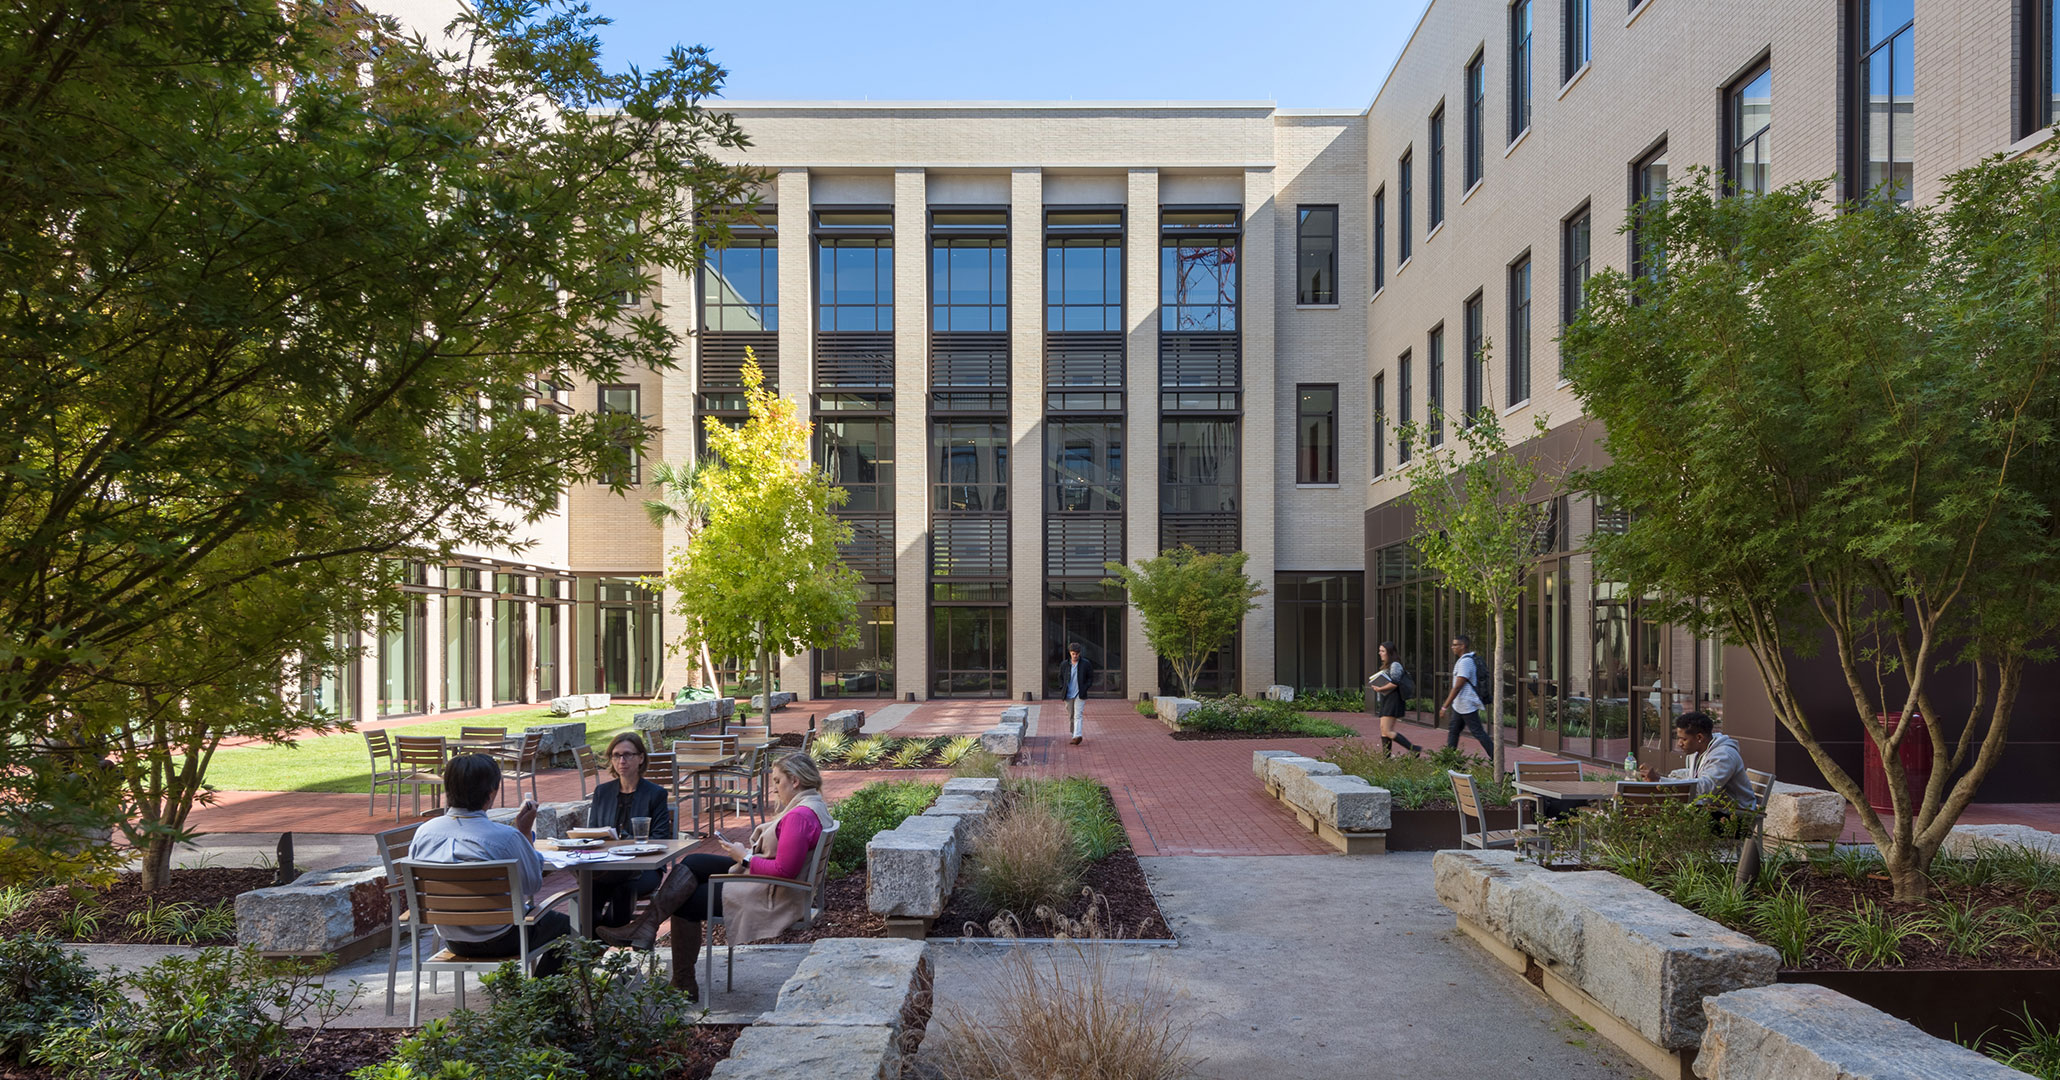 Boudreaux architects created meetings spaces outside to improve student traffic flow at the new Law School.